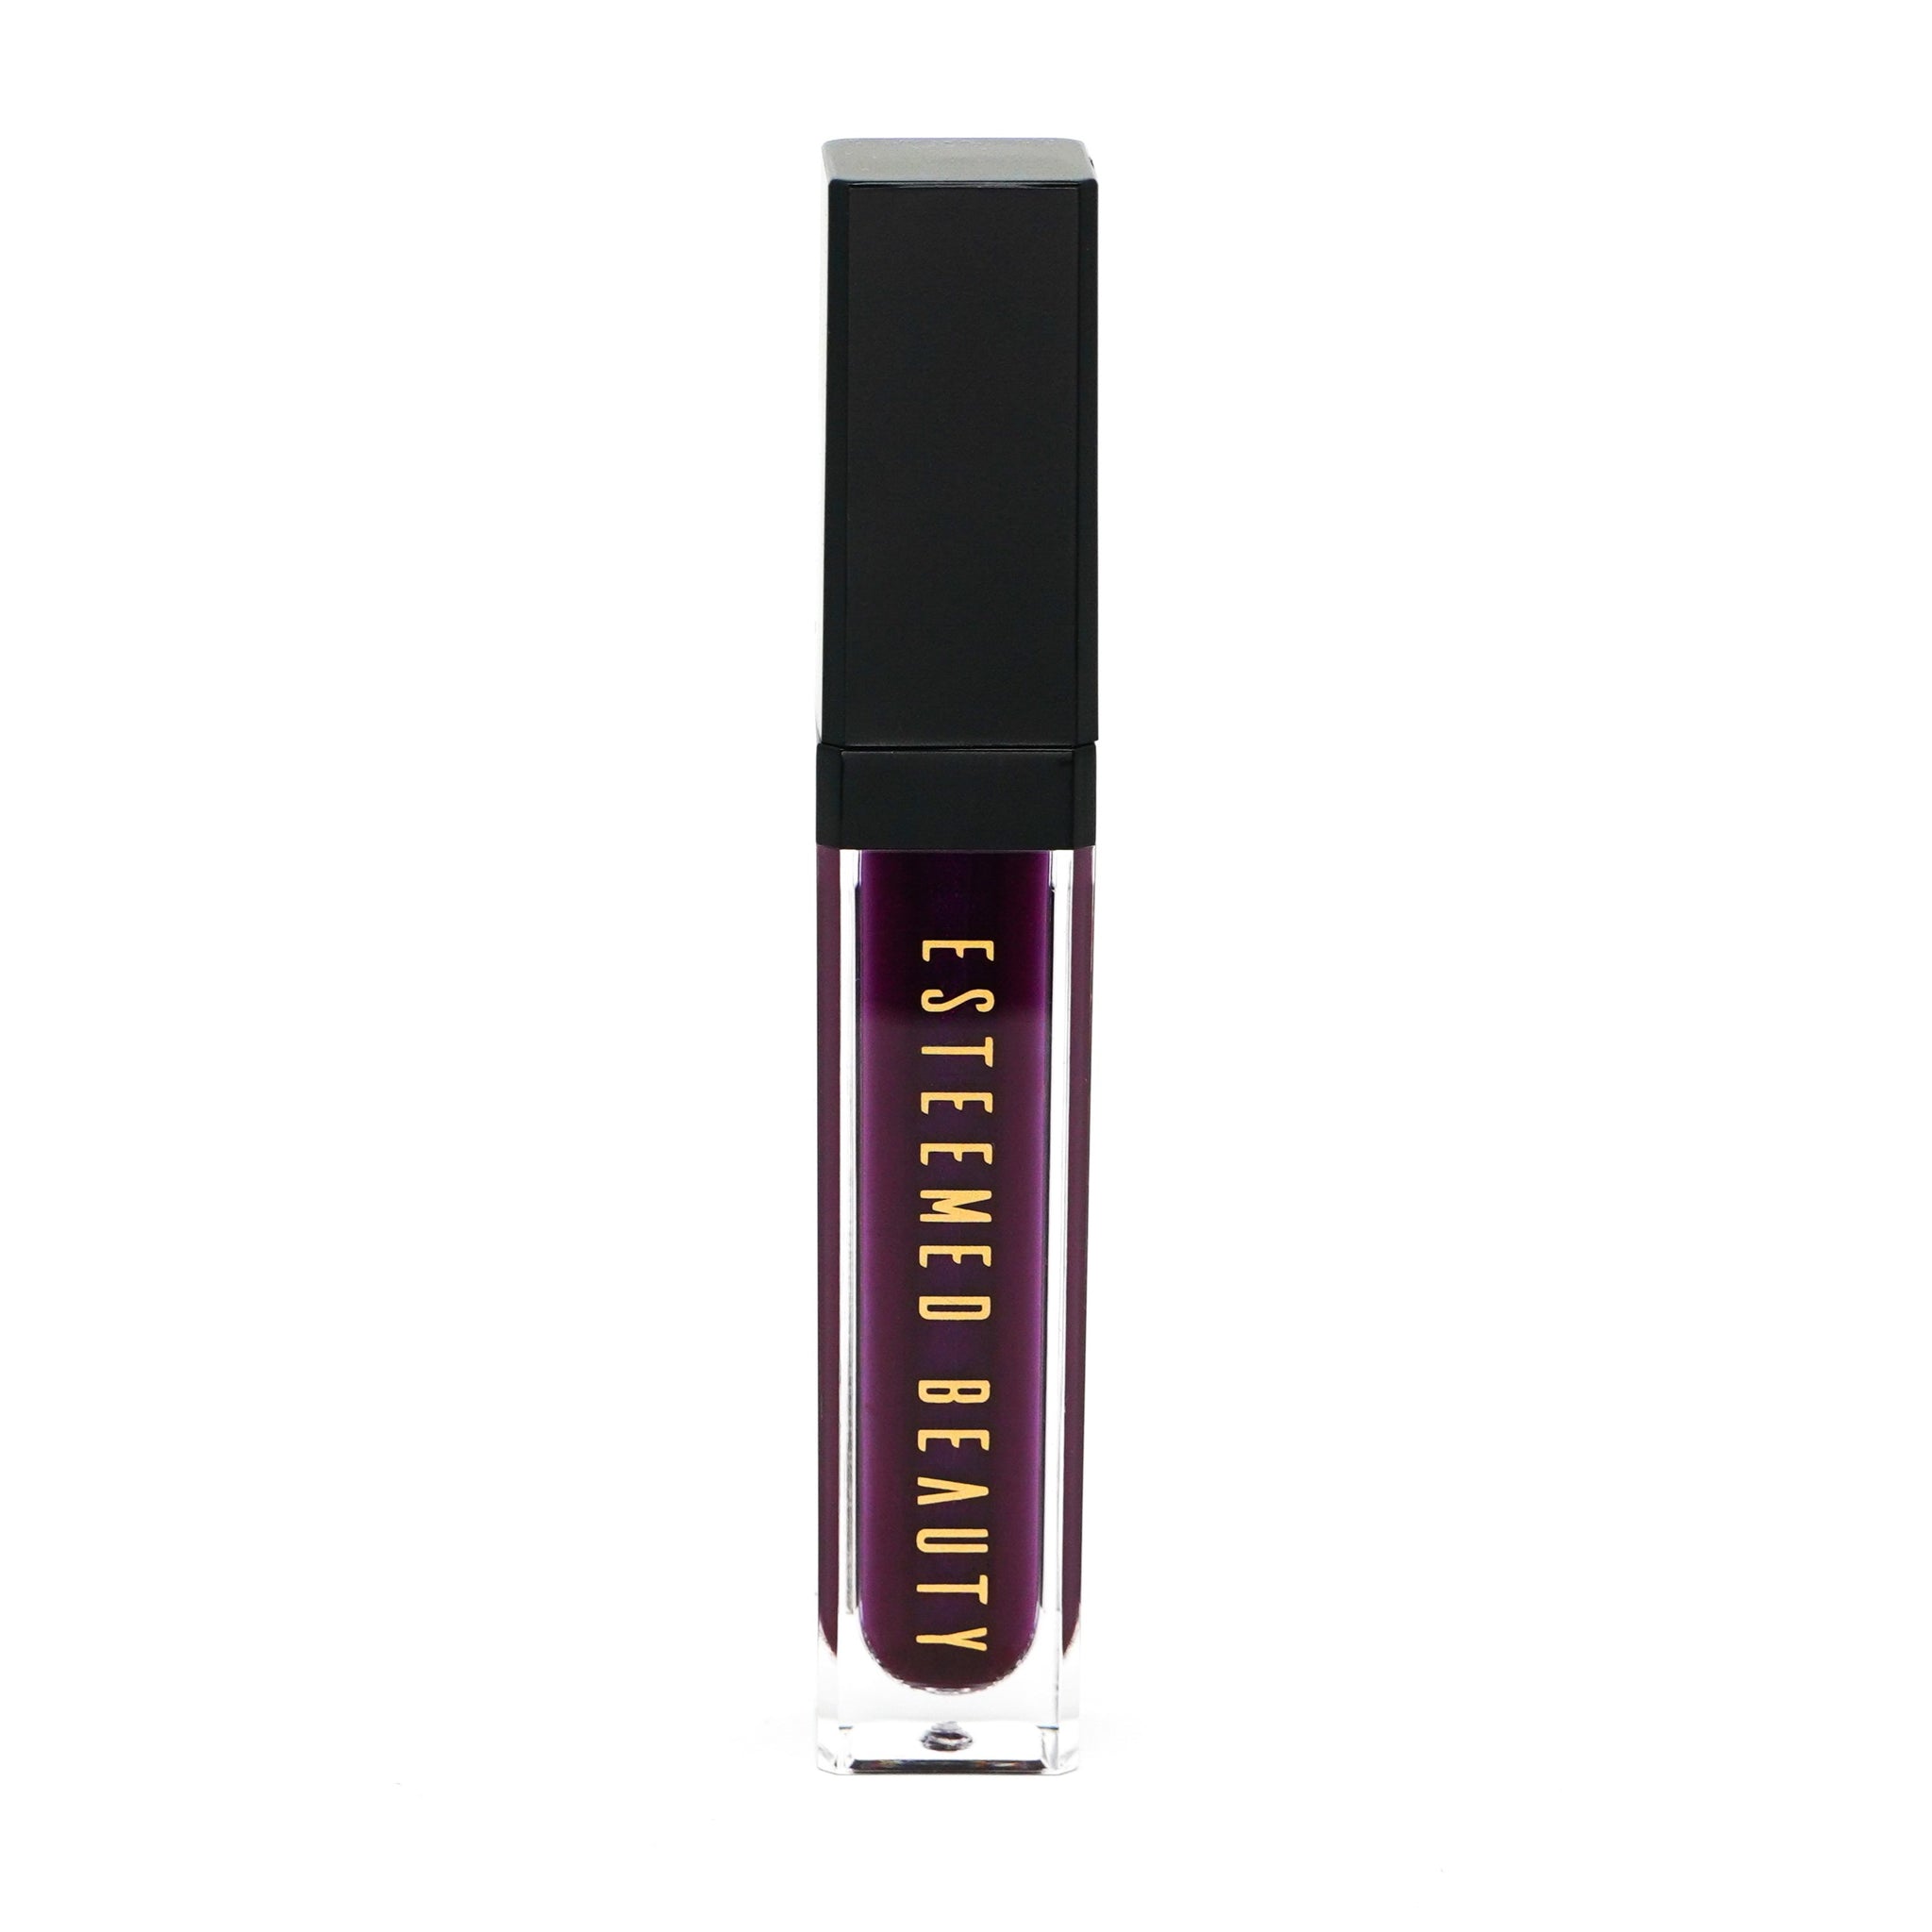 Feisty Long Lasting Liquid Lipstick-Matte with Light and mirror